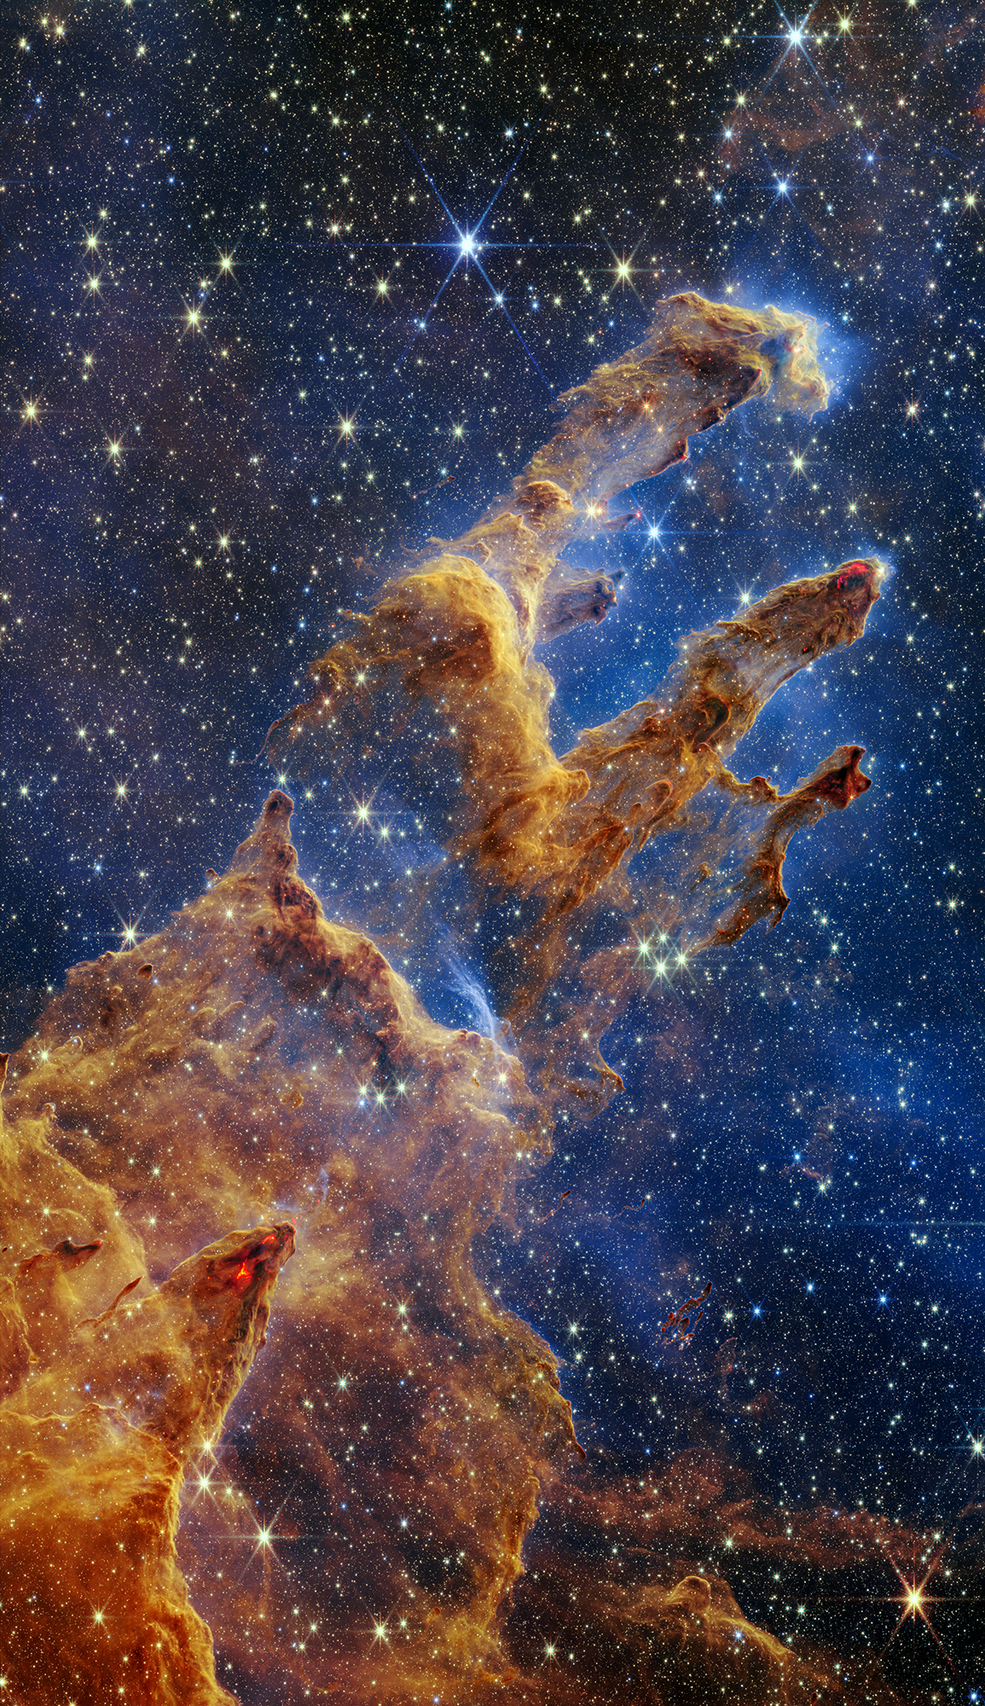 Webb telescope’s Pillars of Creation shows us things Hubble couldn’t